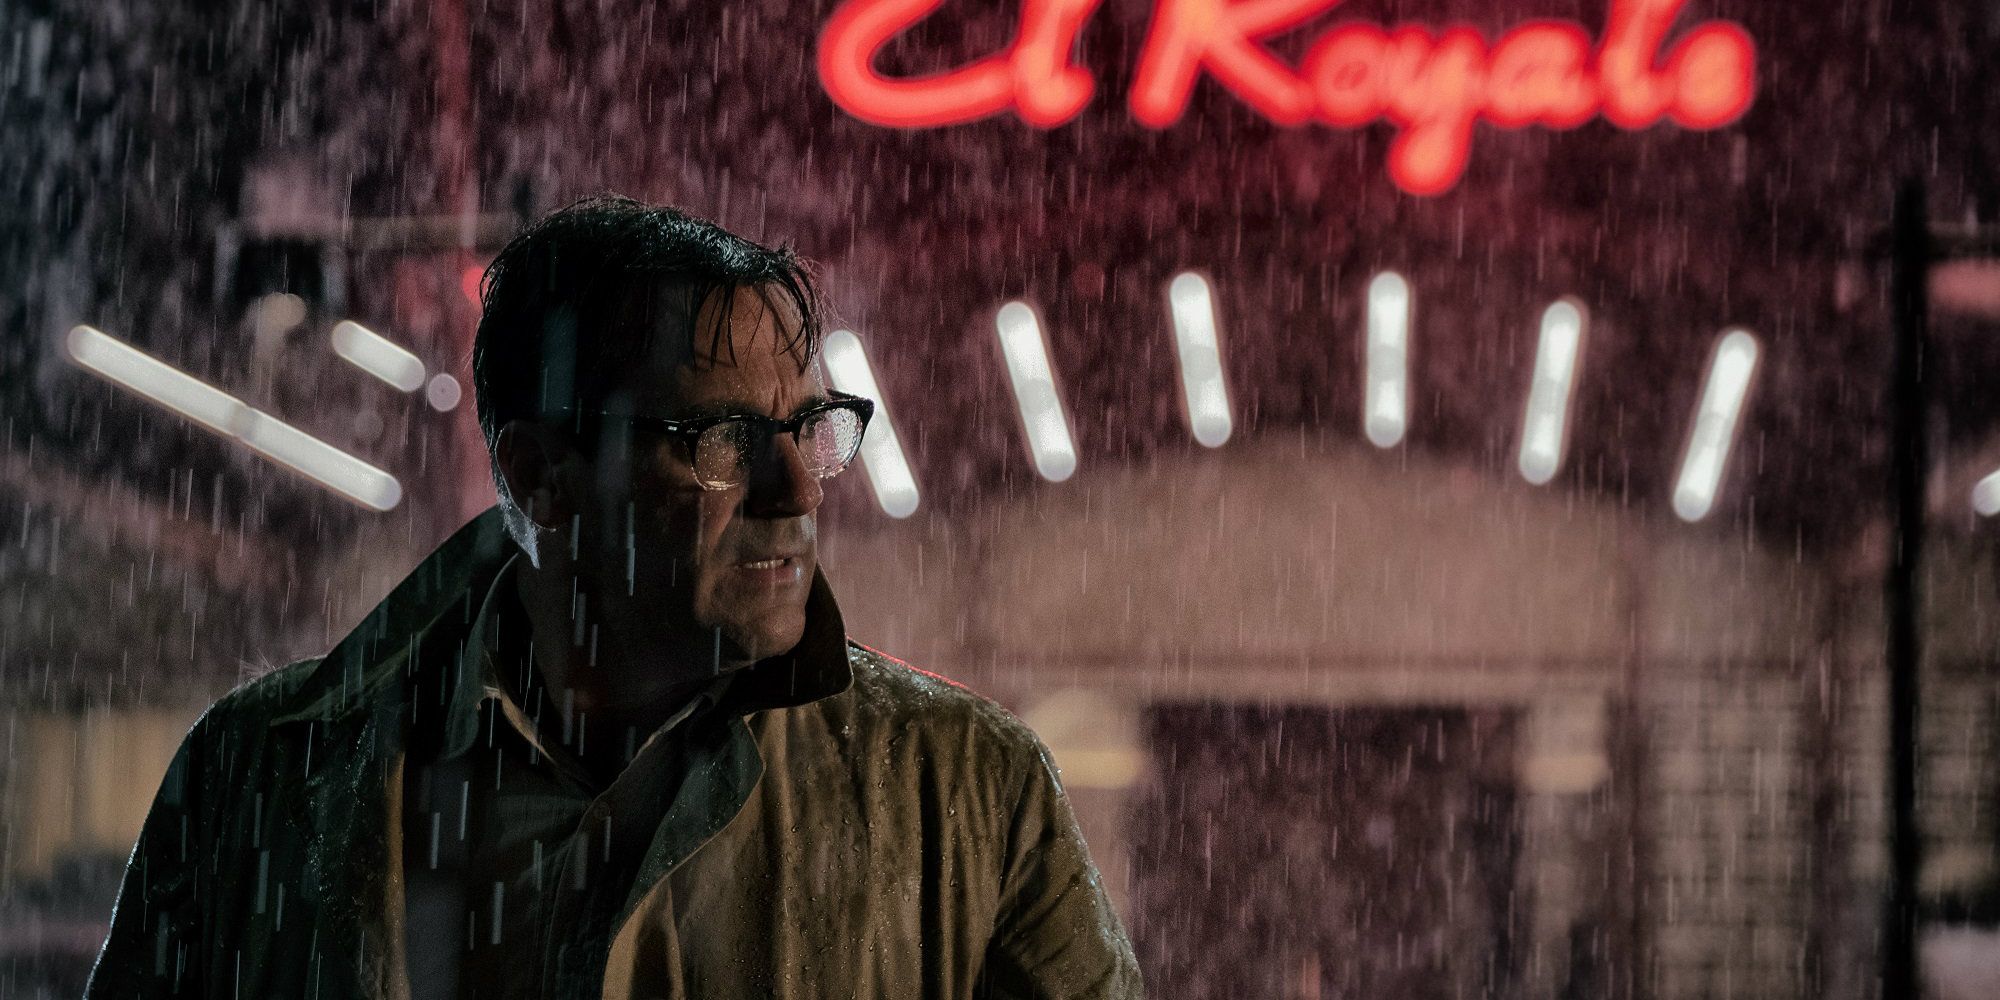 Laramie under the rain in Bad Times at the El Royale